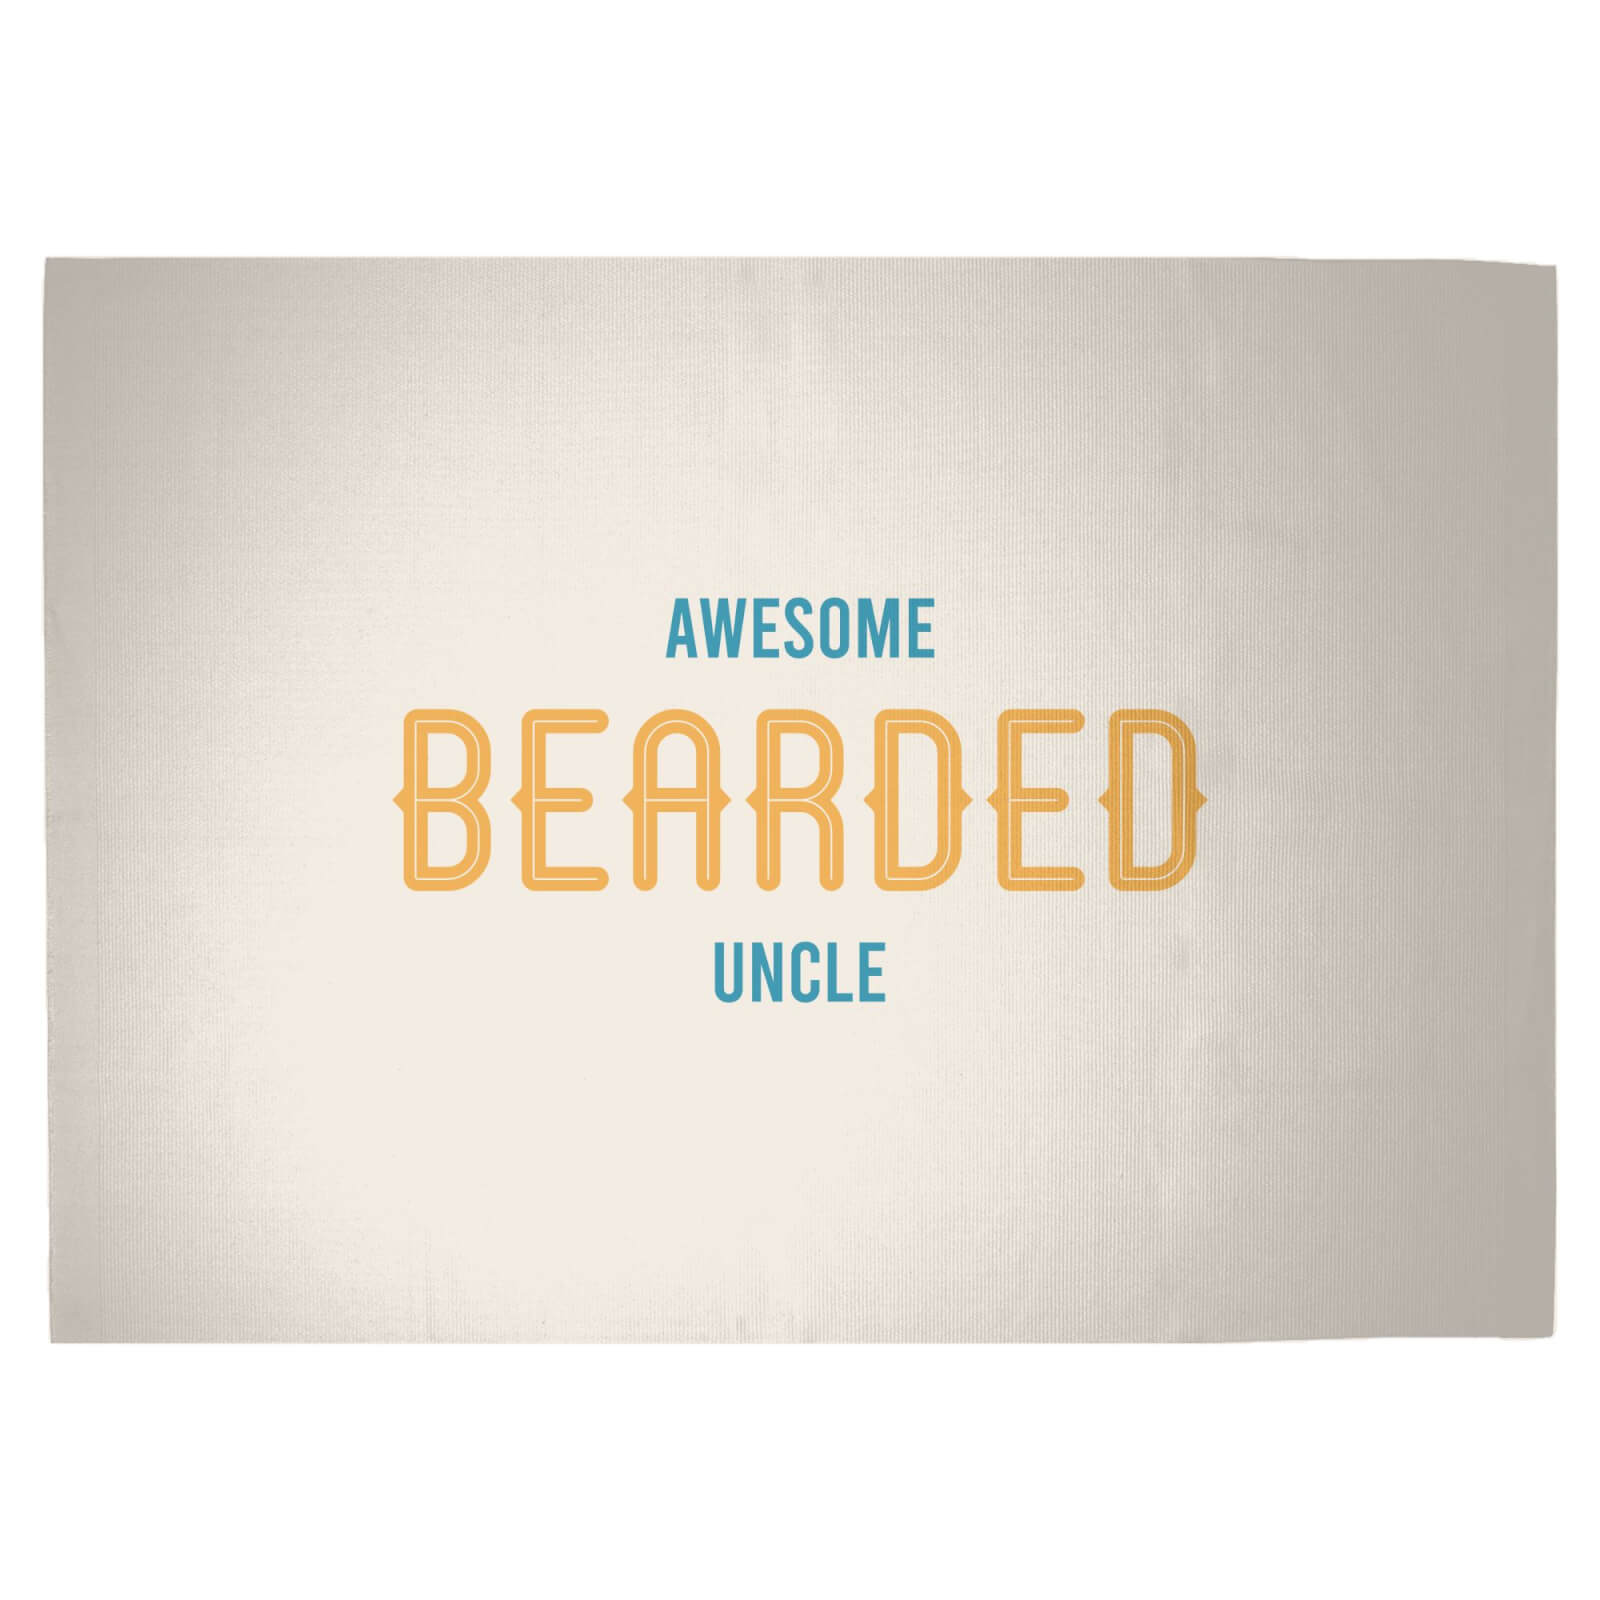 Awesome Bearded Uncle Woven Rug - Large